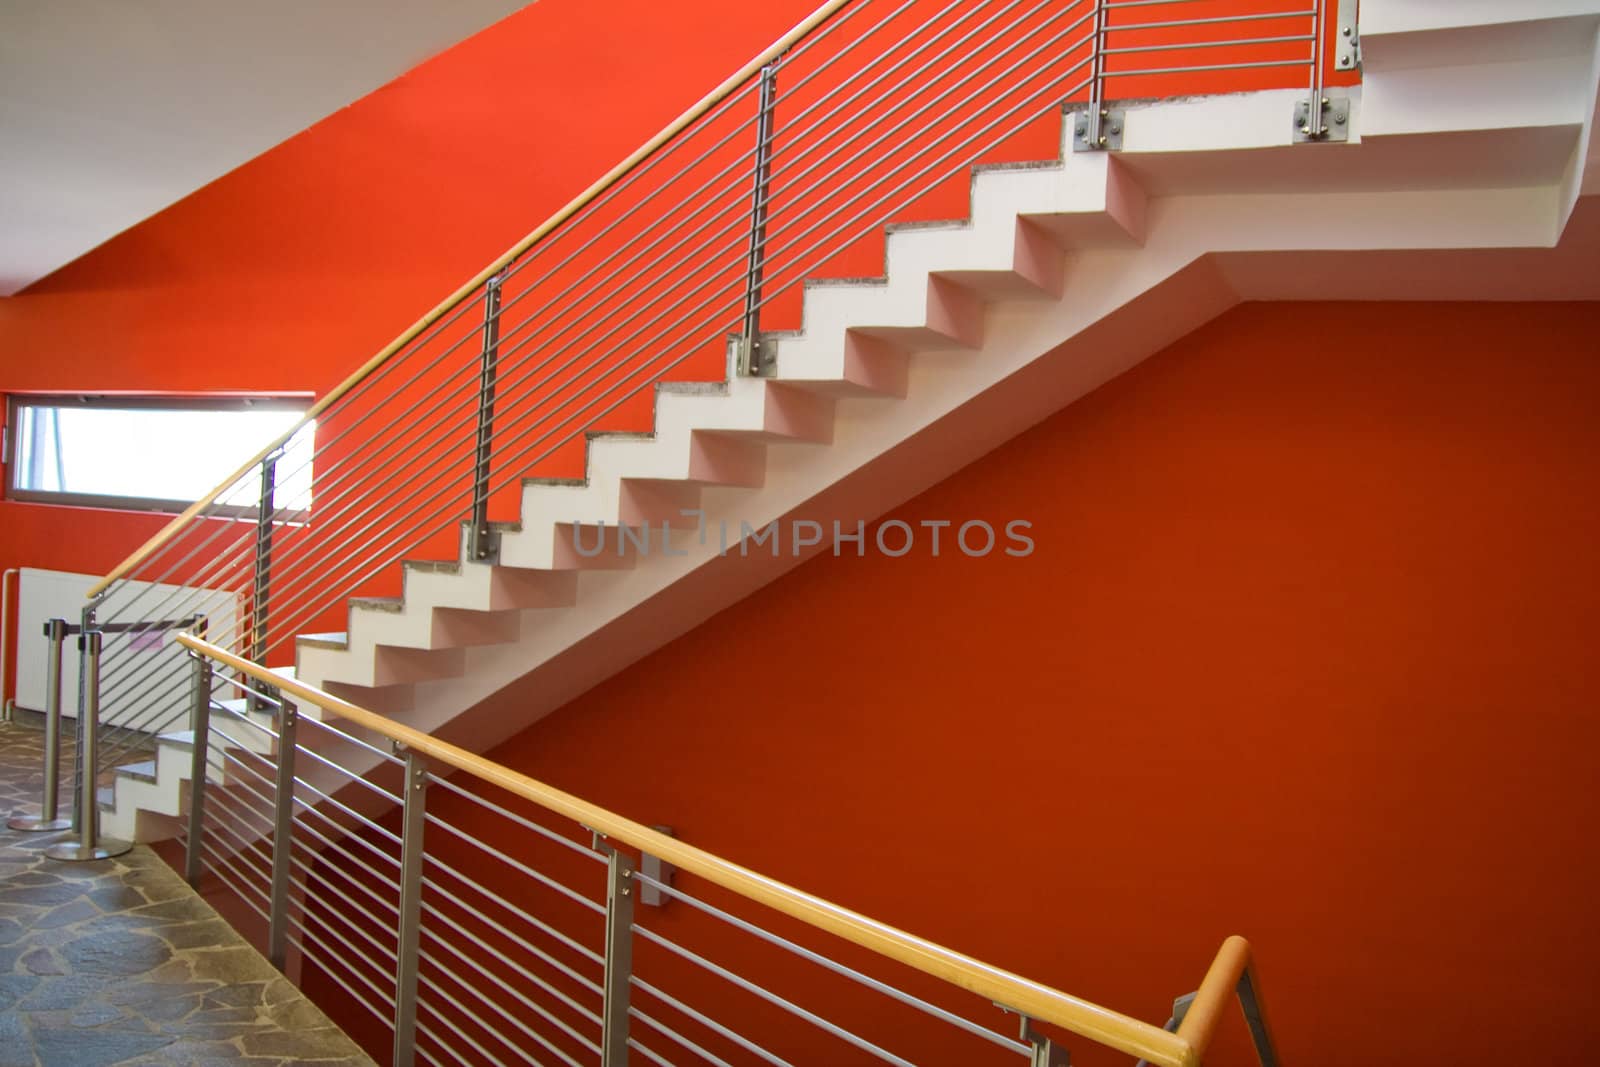 Staircase with red wall and fence going upstairs.